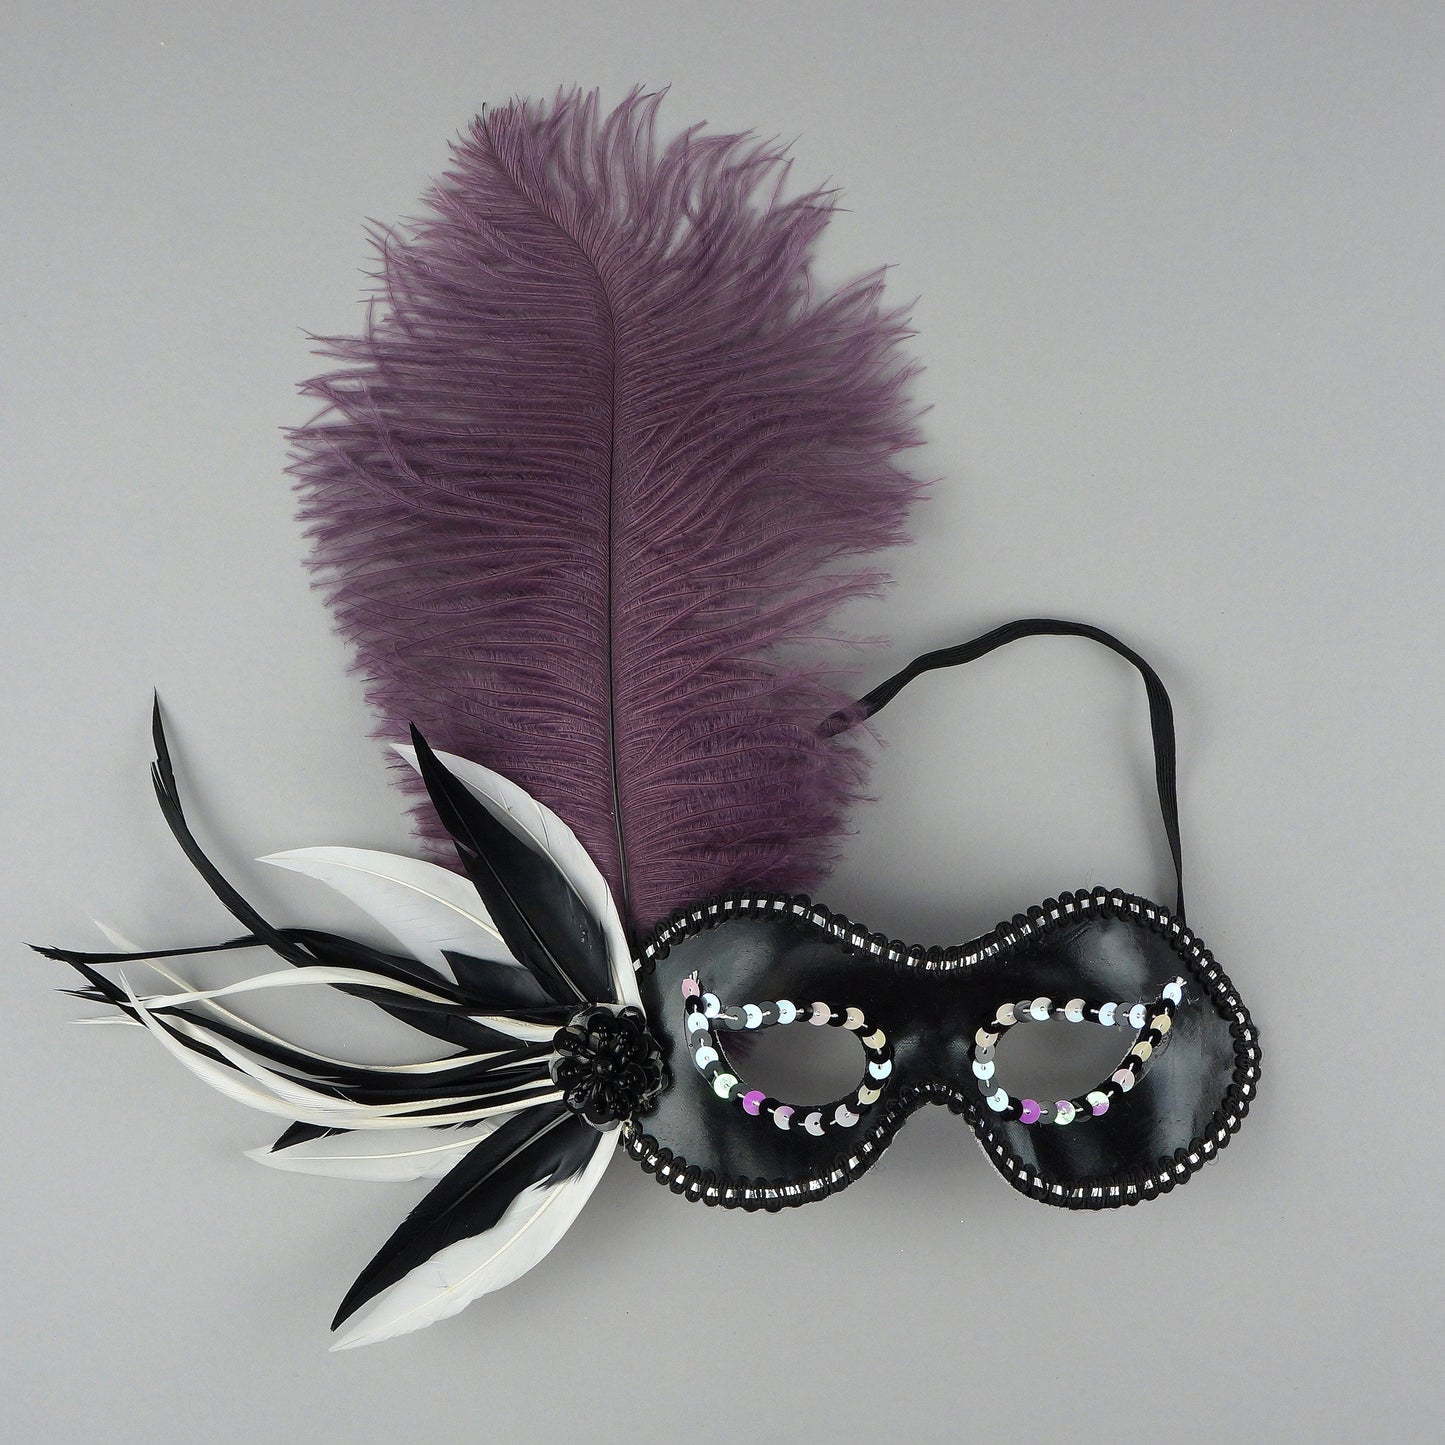 Ostrich Feathers 9-12" Drabs -  Amethyst